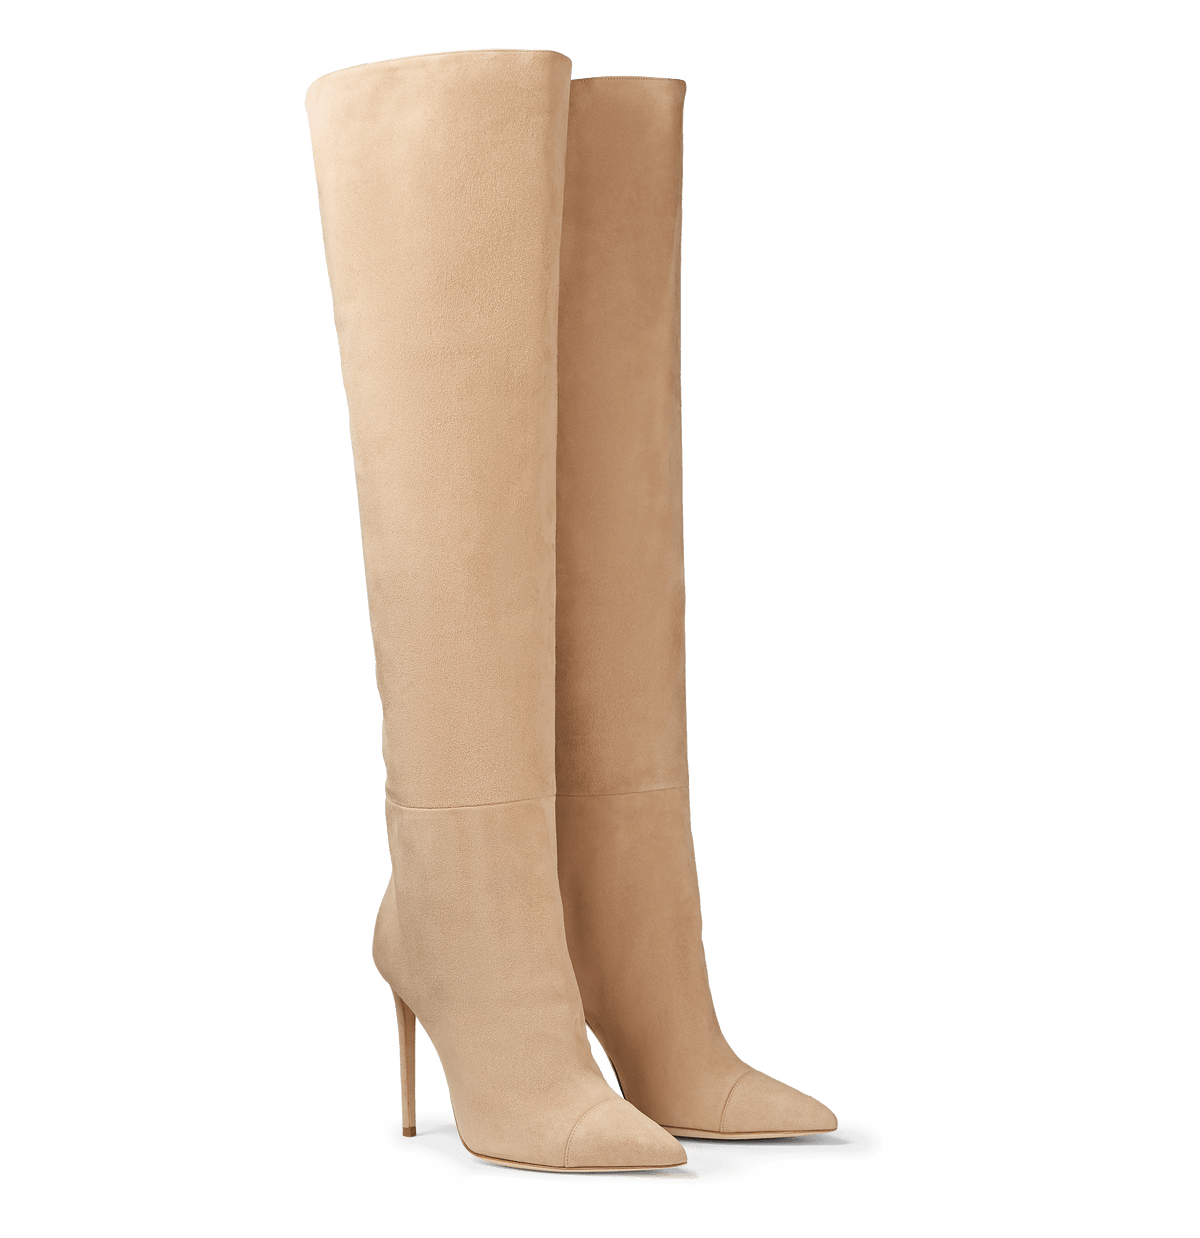 Tan Suede Over the Knee Boots